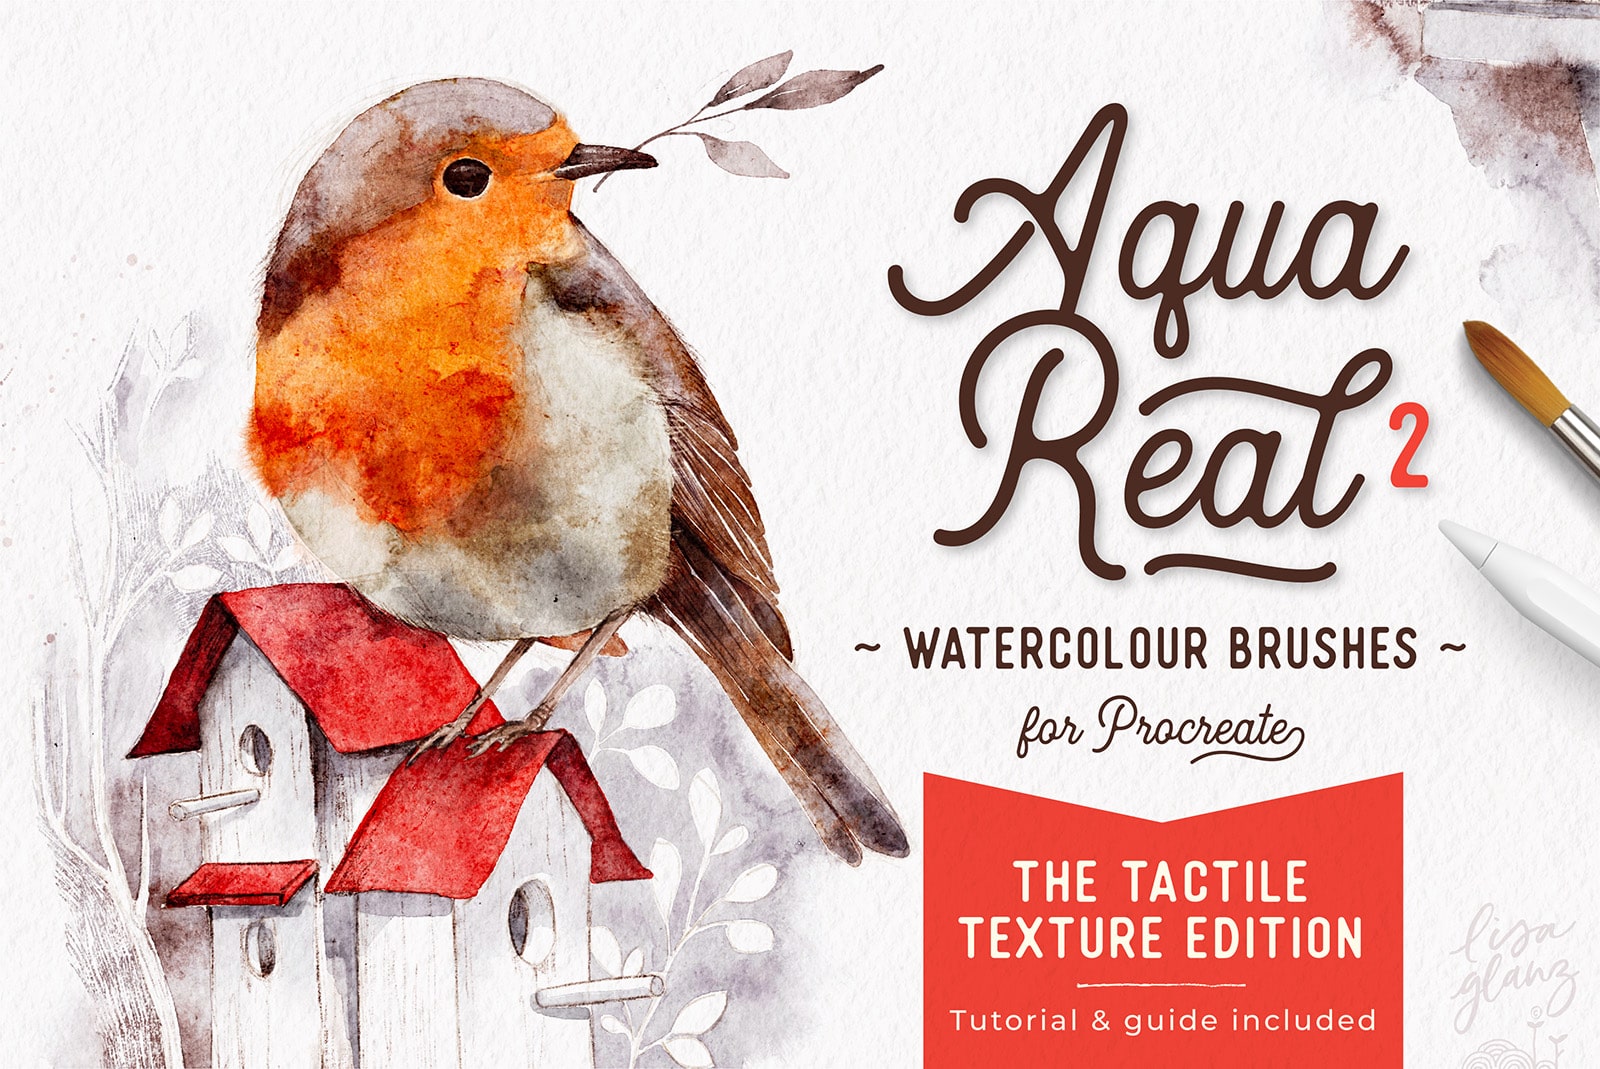 AquaReal 2 – Tactile Texture Edition Watercolour Brushes For Procreate